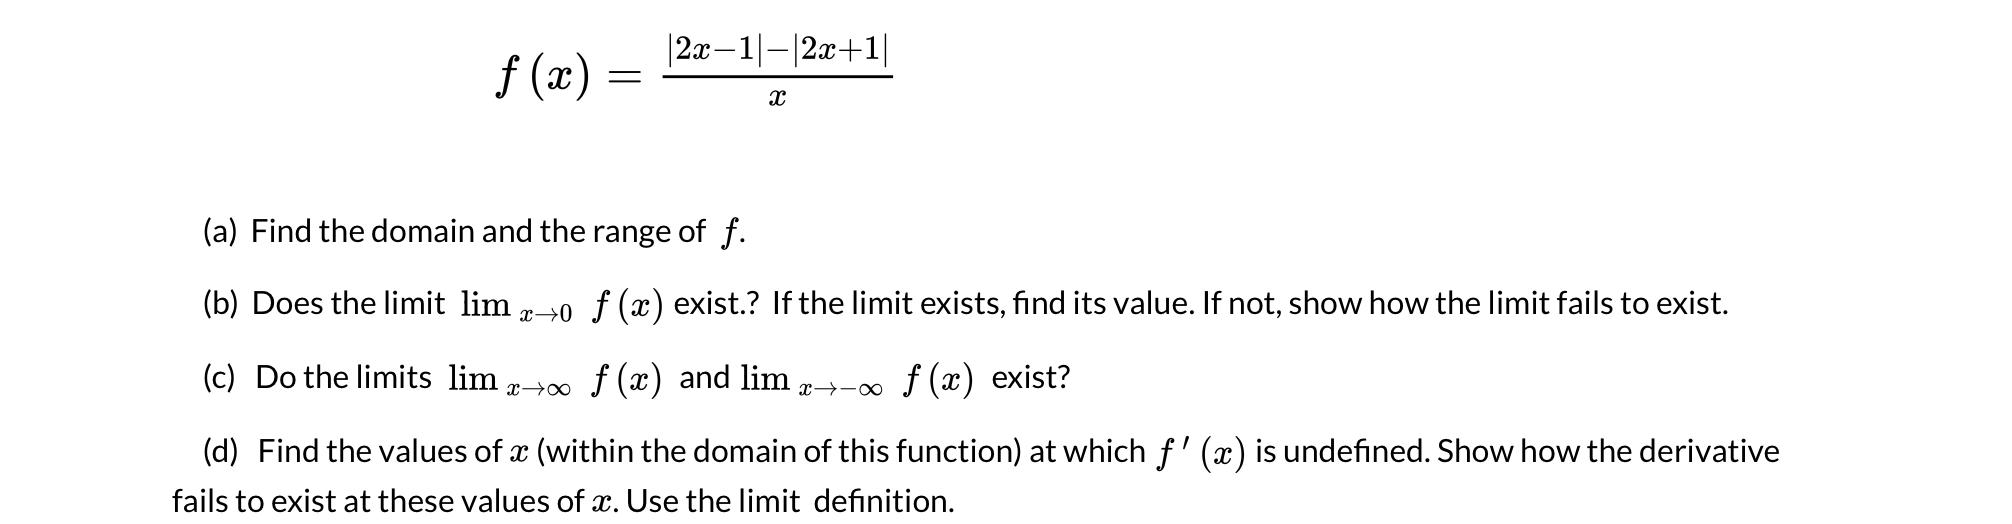 |2x–1|-|2x+1|
f (x) :
(a) Find the domain and the range of f.
(b) Does the limit lim -0 f (x) exist.? If the limit exists, find its value. If not, show how the limit fails to exist.
(c) Do the limits lim,
x→∞ f (x) and lim
f (x) exist?
x→-∞
(d) Find the values of x (within the domain of this function) at which f' (x) is undefined. Show how the derivative
fails to exist at these values of x. Use the limit definition.
